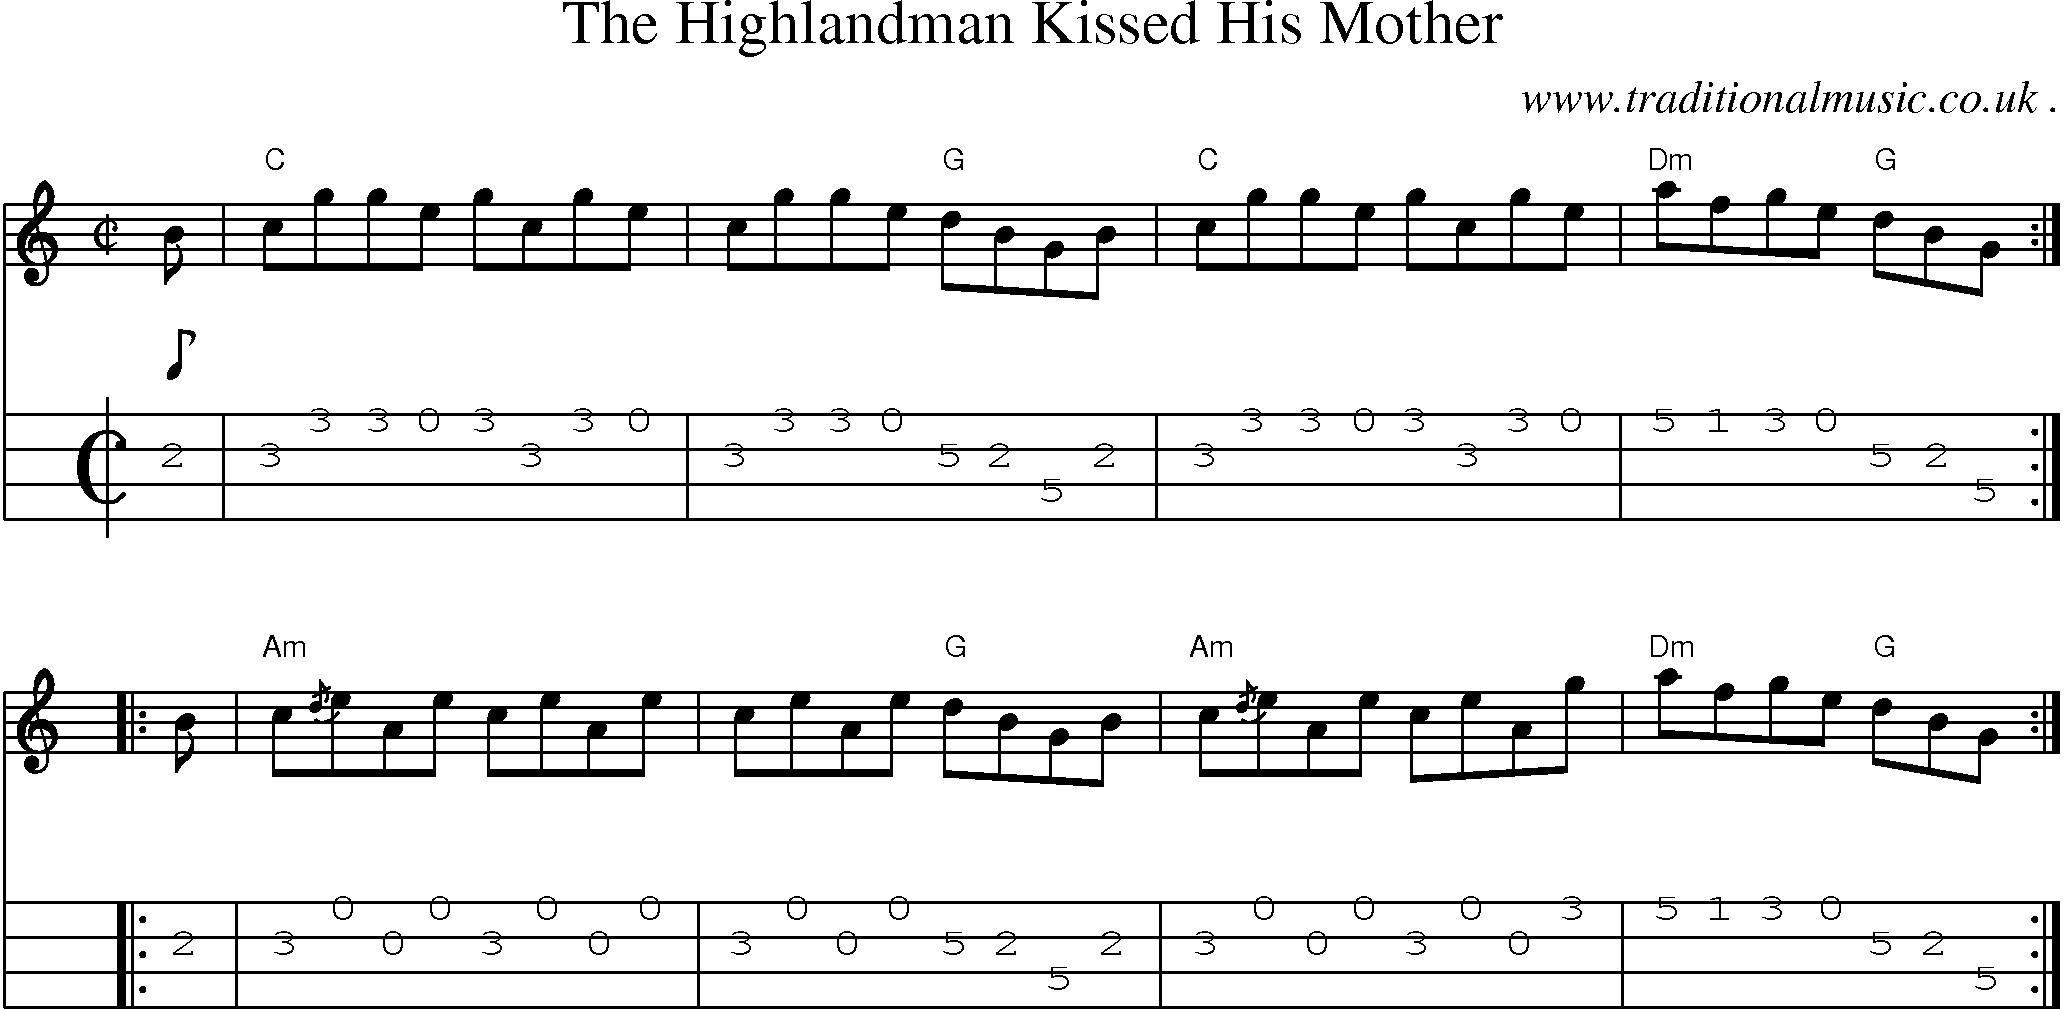 Sheet-music  score, Chords and Mandolin Tabs for The Highlandman Kissed His Mother